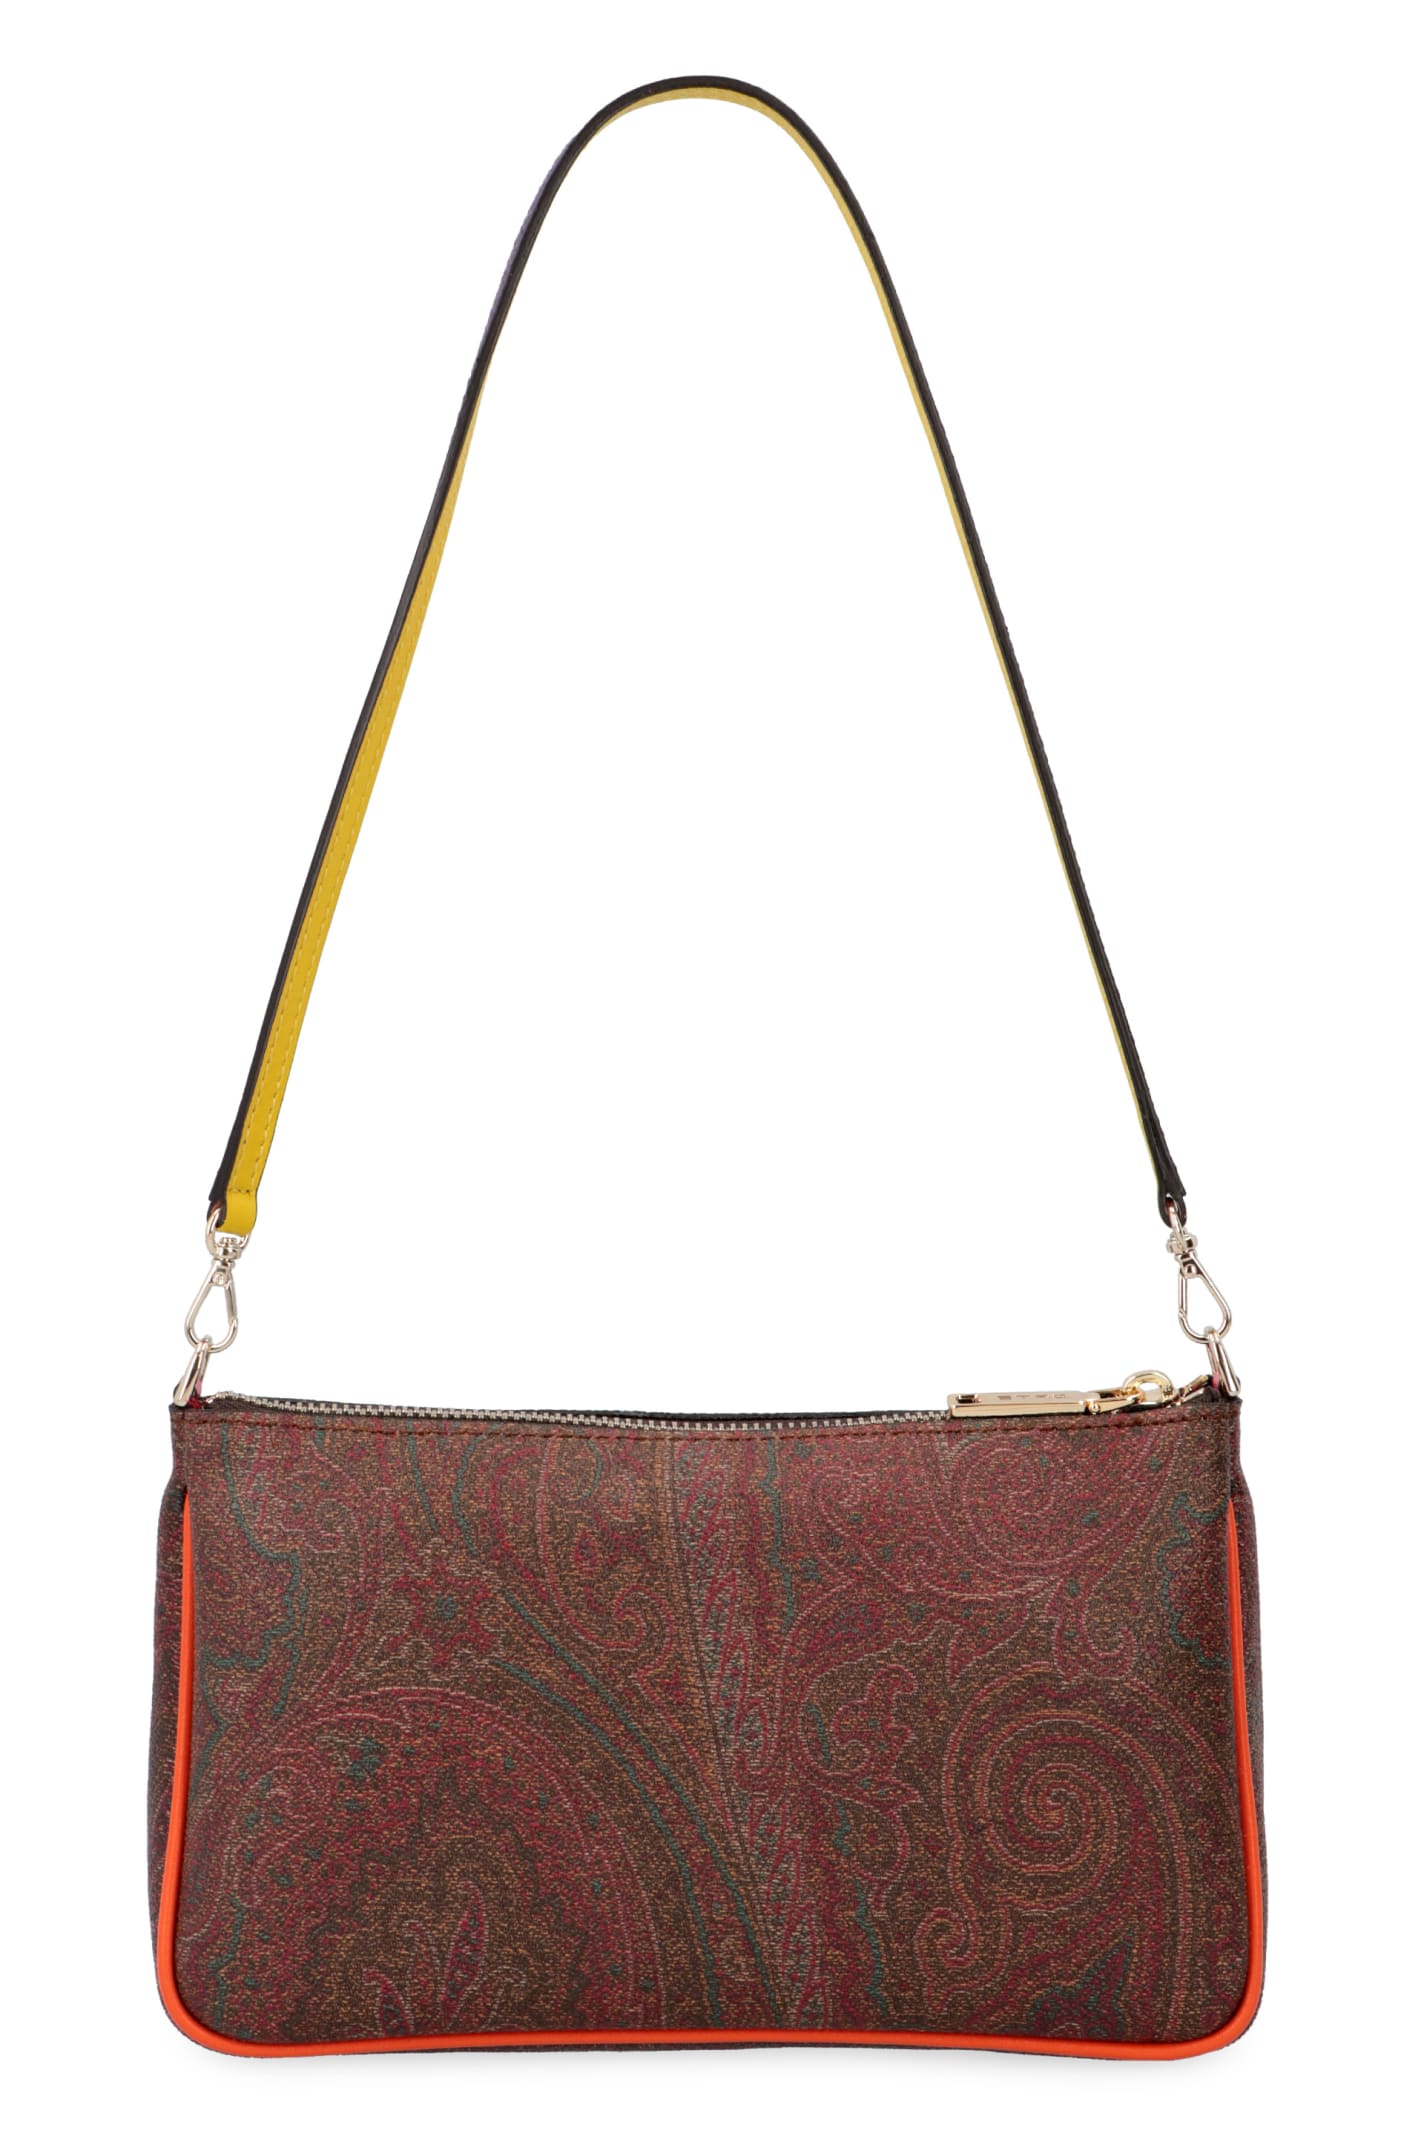 Etro Tan/Brown Paisley Printed Coated Canvas Shopper Tote Etro